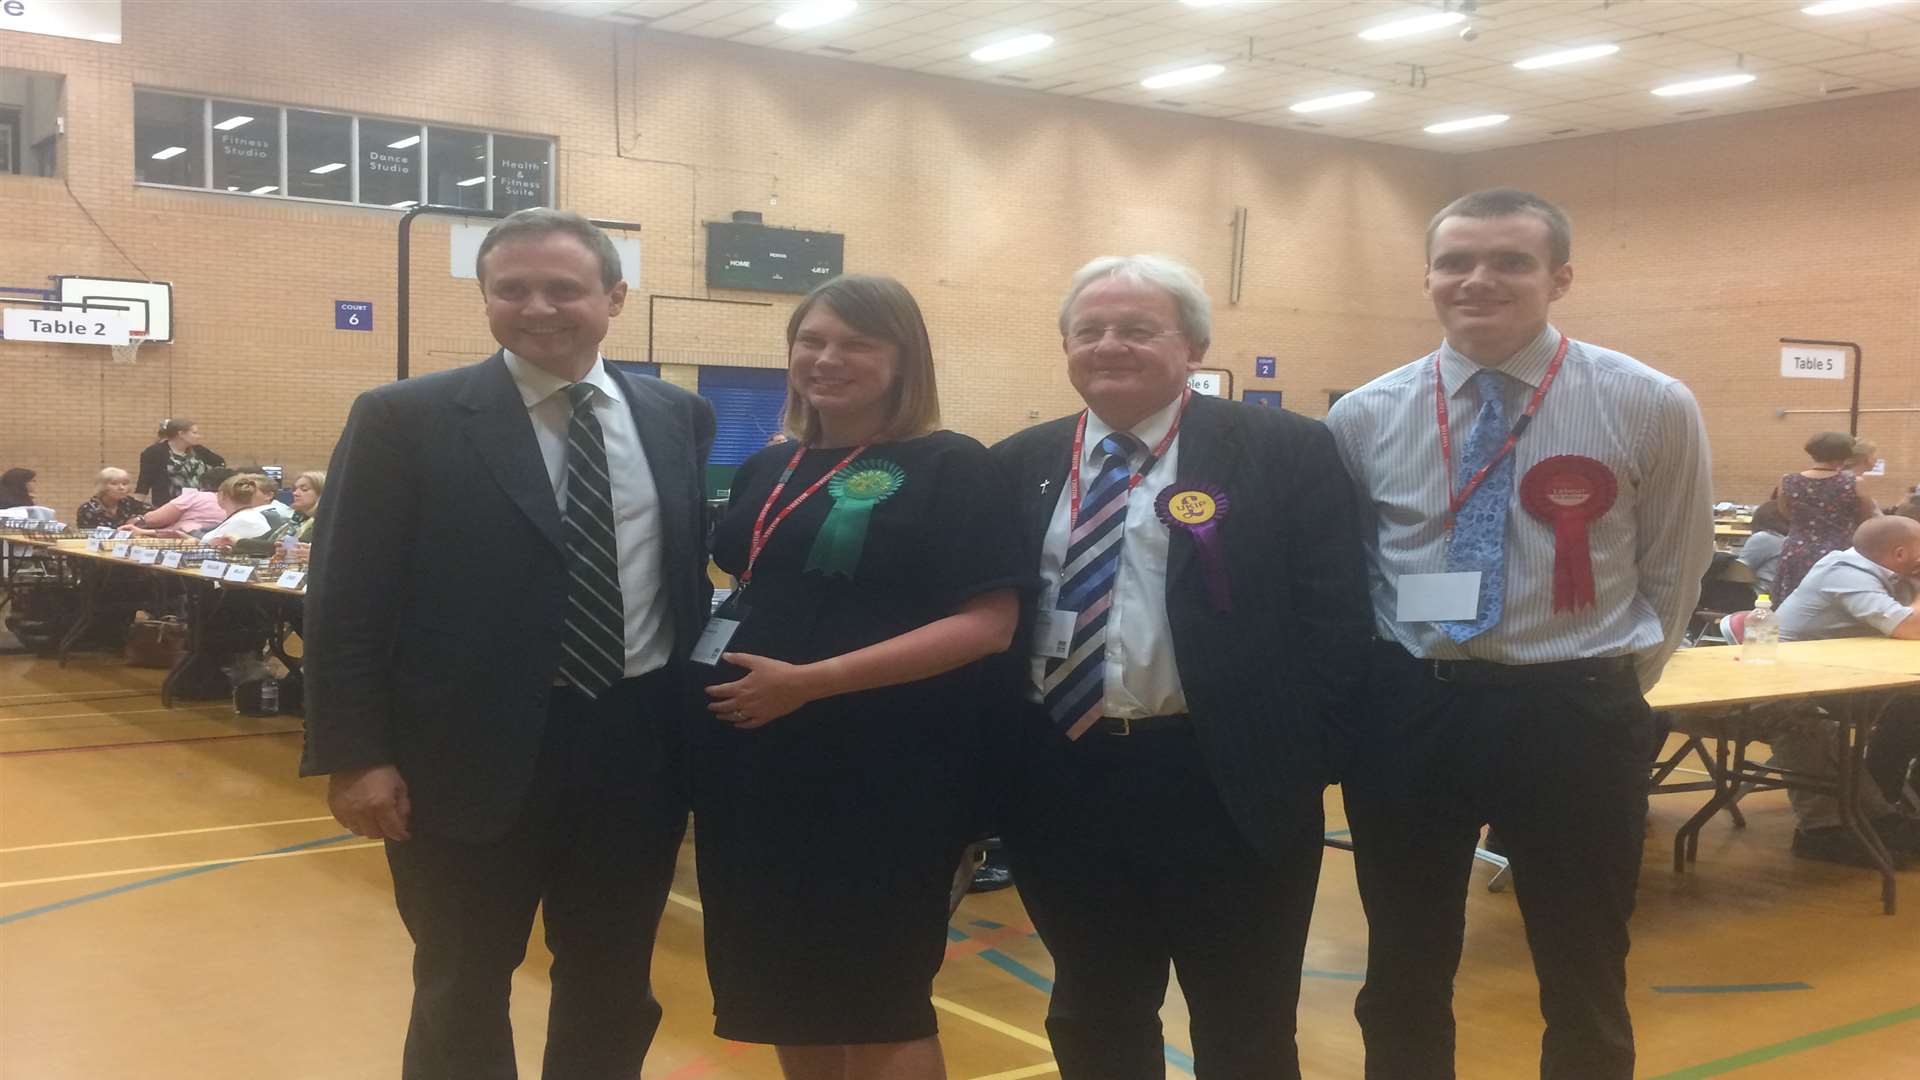 Tom Tugendhat (Con), April Clark (Green), Colin Bullen (Ukip), and Dylan Jones (Lab) before the result announcement.